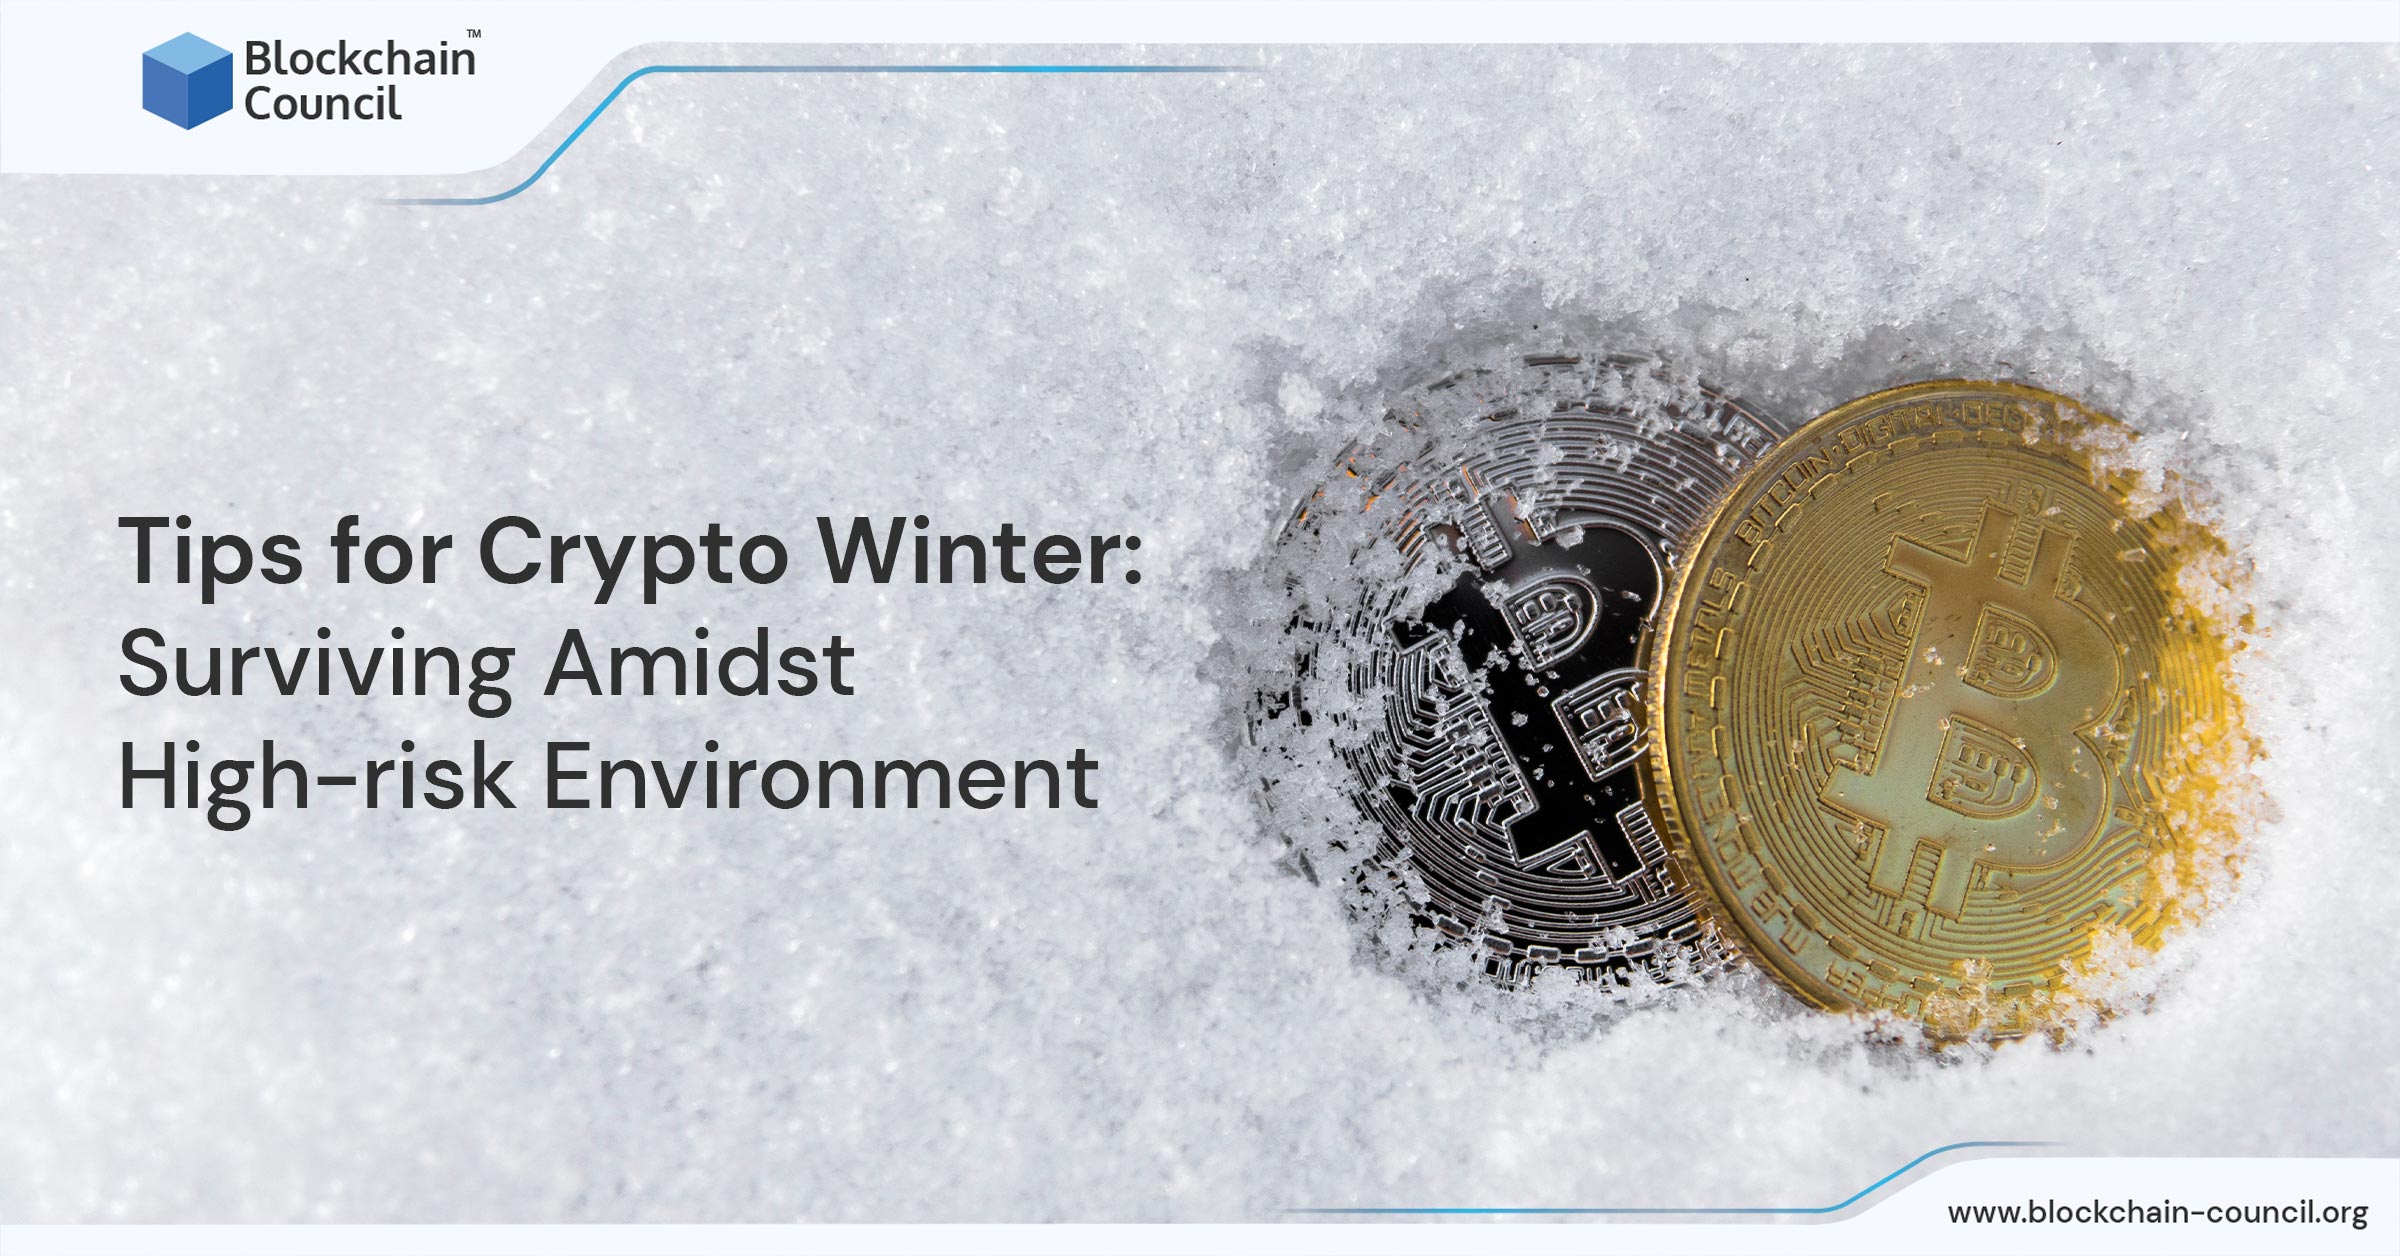 Tips for Crypto Winter Surviving Amidst High-risk Environment